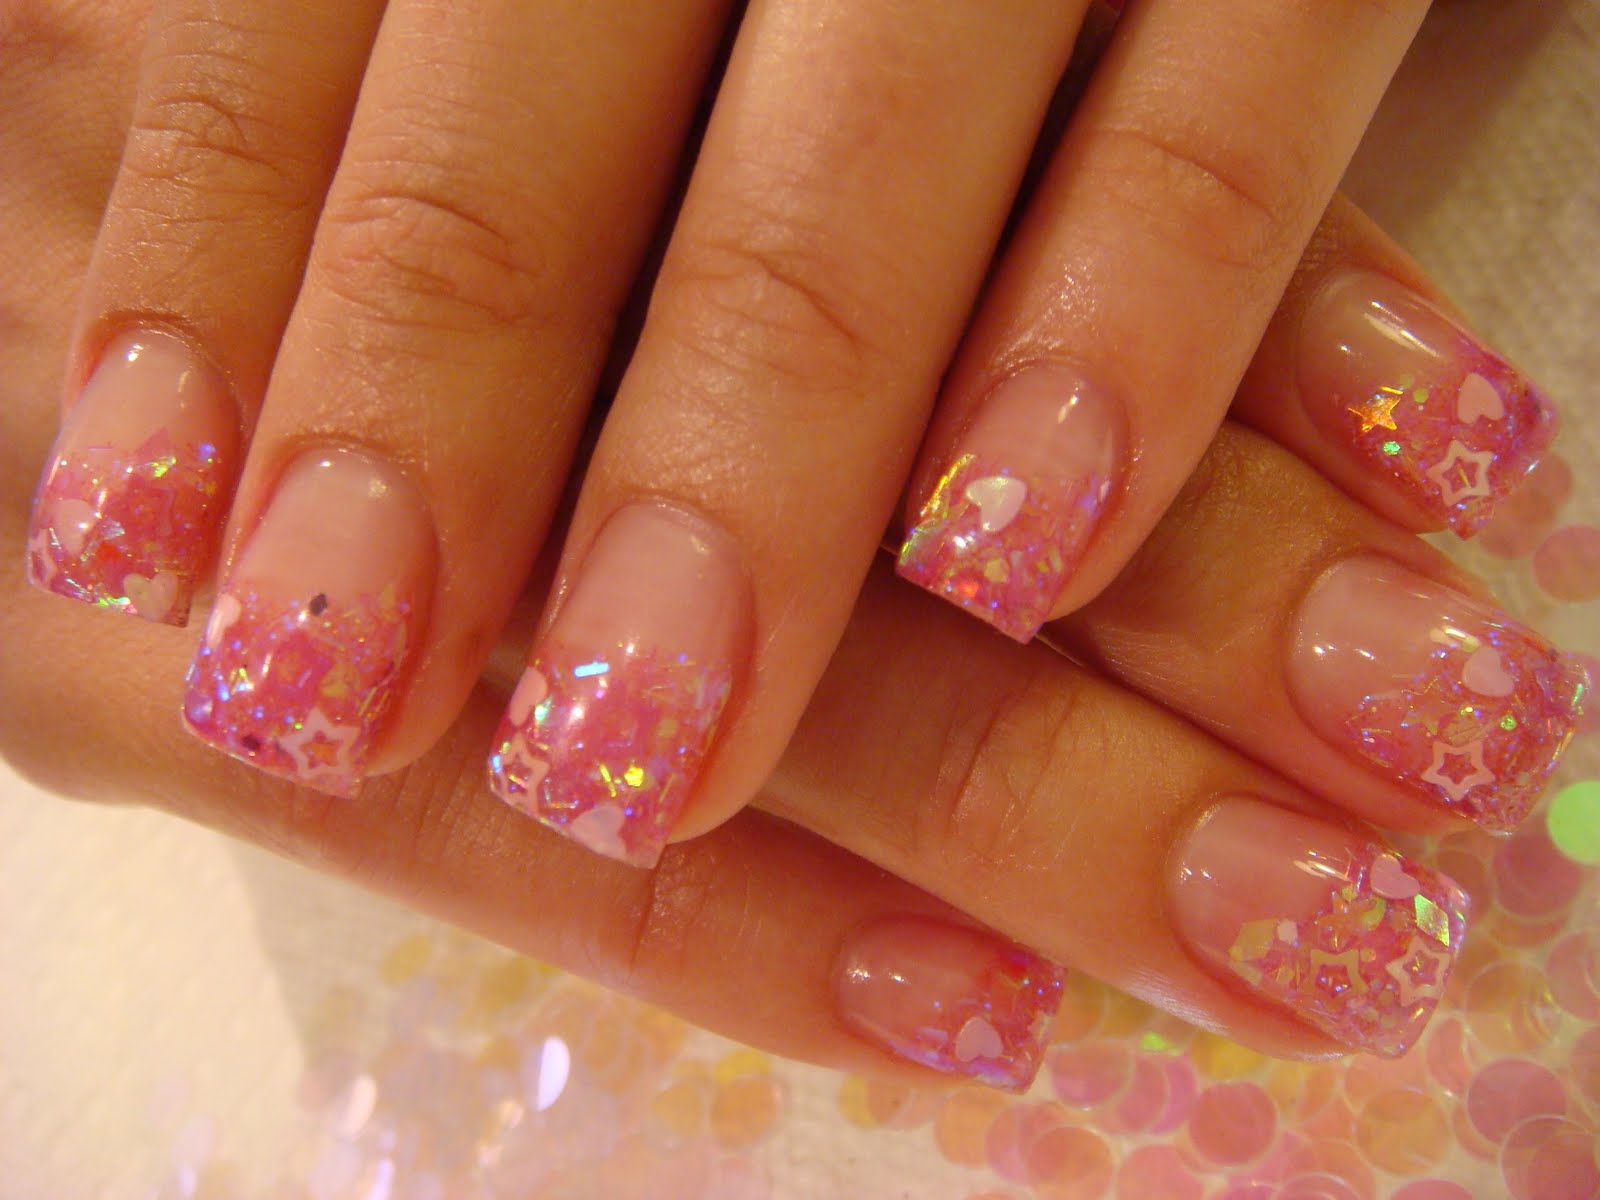 5. "Cute Acrylic Nails for Instagram: " - wide 6